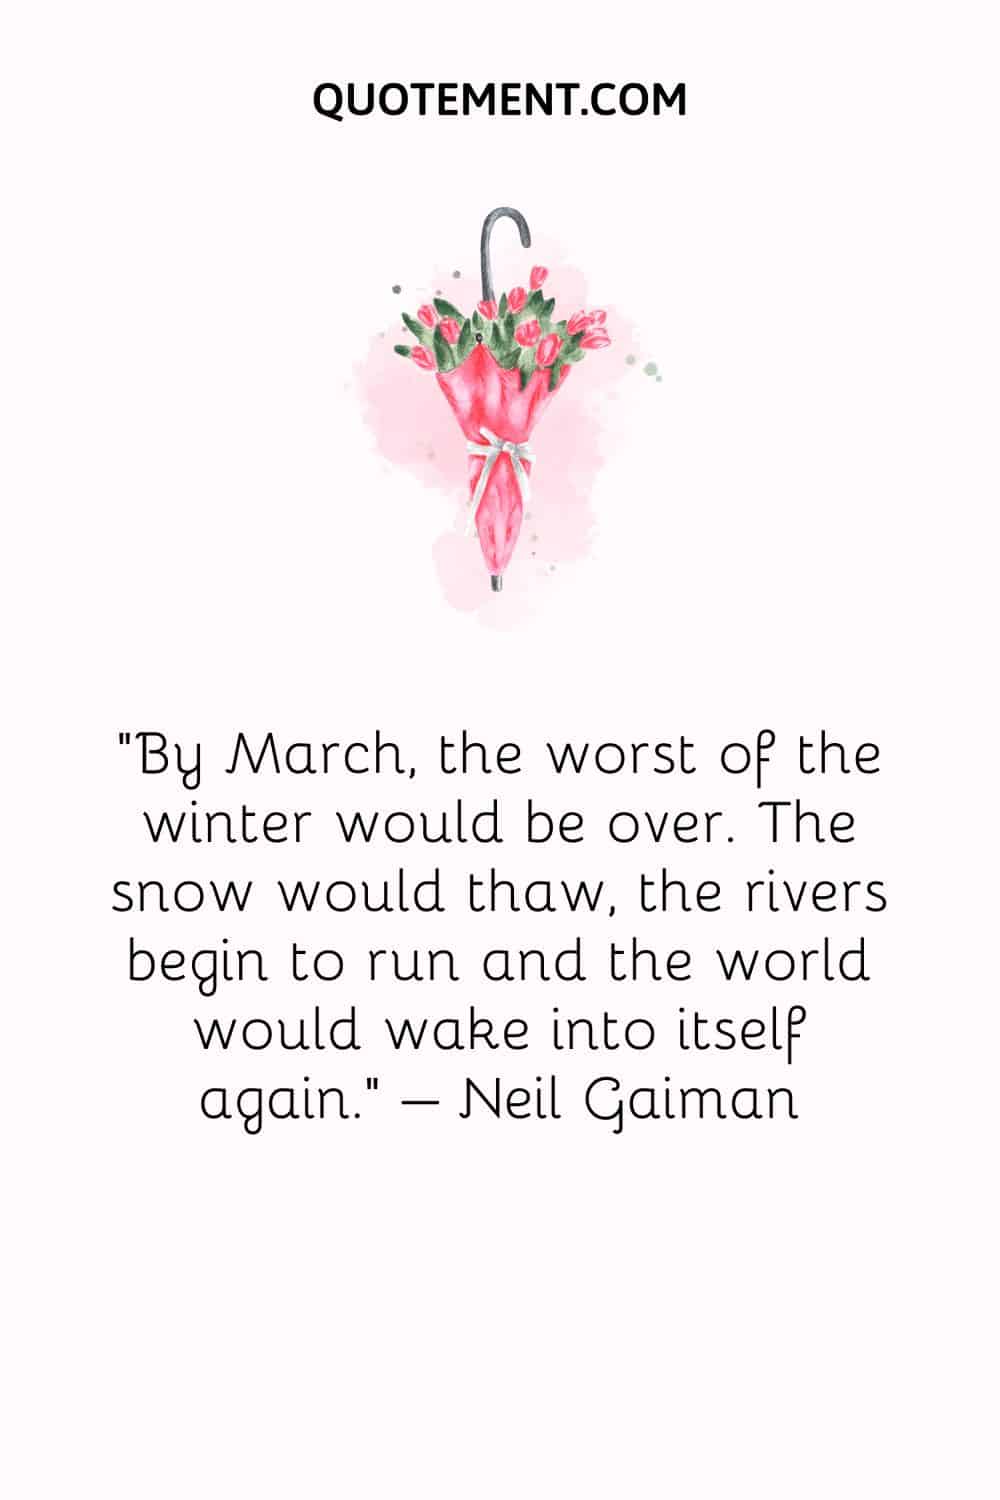 By March, the worst of the winter would be over. The snow would thaw, the rivers begin to run and the world would wake into itself again. – Neil Gaiman